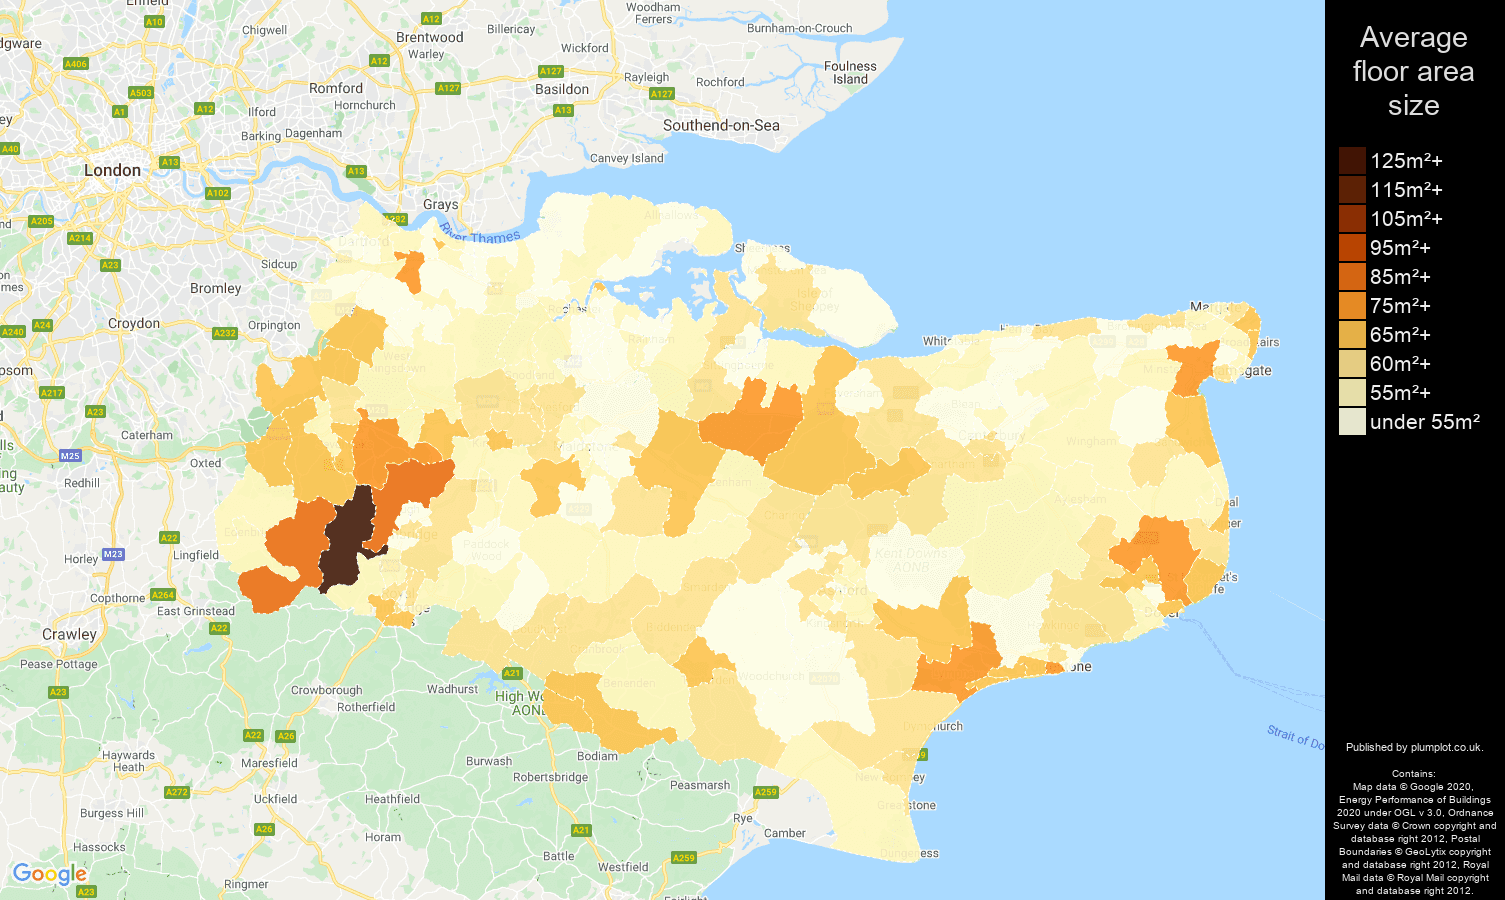 Kent map of average floor area size of flats